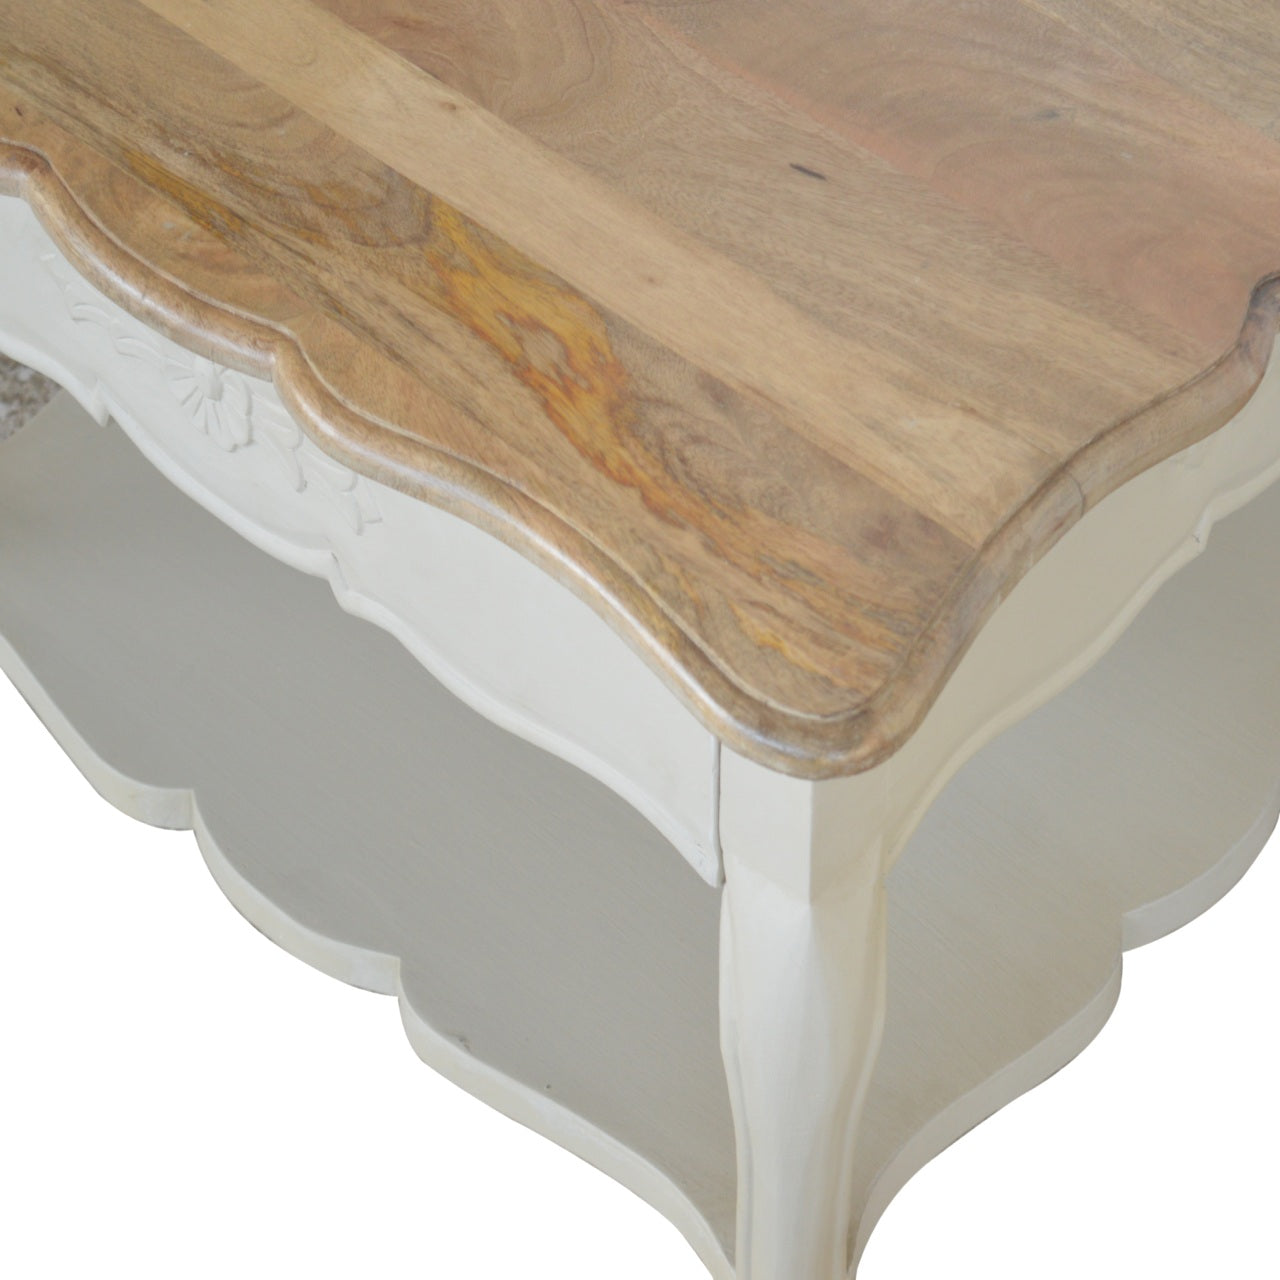 Amberly Carved Coffee Table - mancavesuperstore